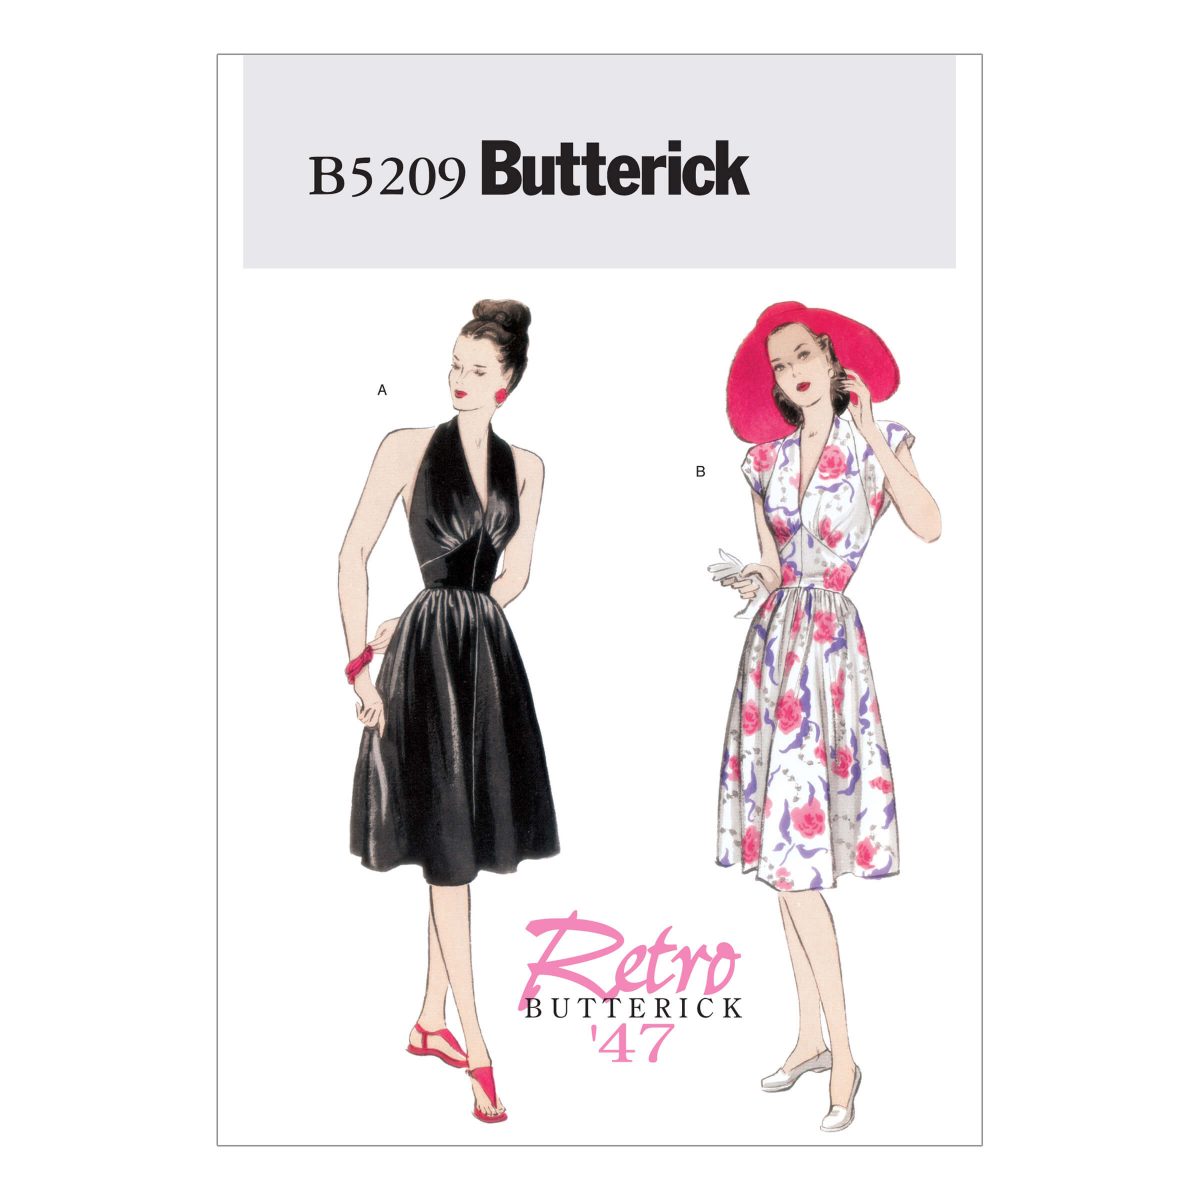 Butterick Sewing Patter B5209 Misses' Dress